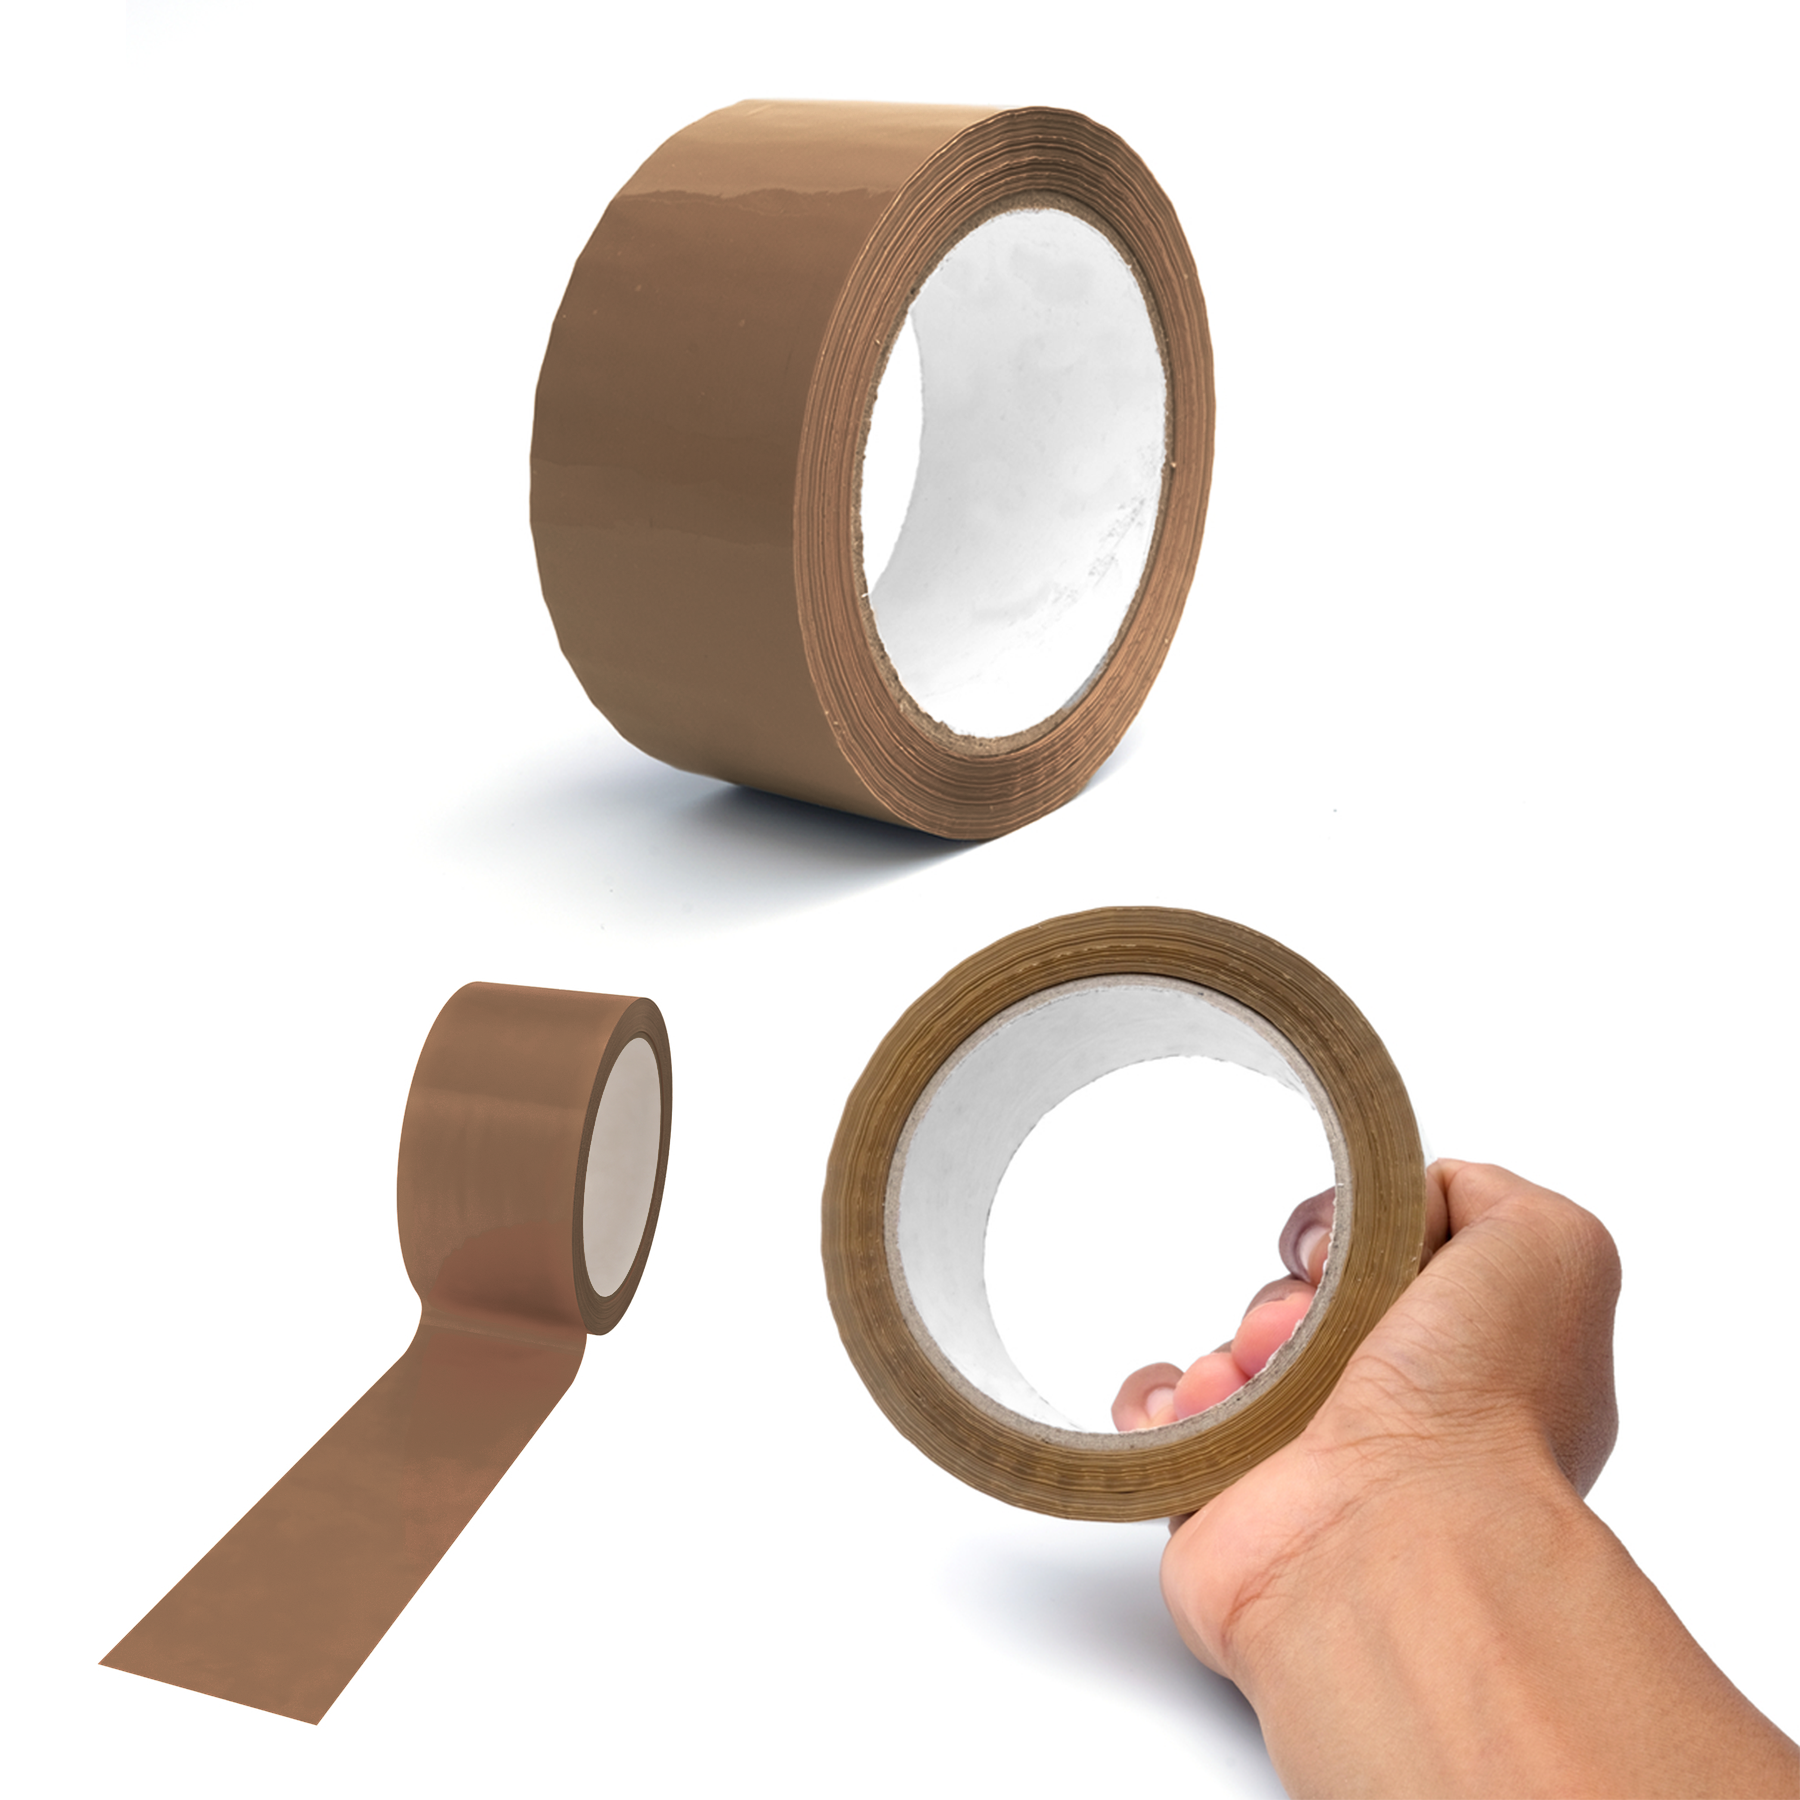 2" 3 ROLLS OF BROWN PACKING PARCEL TAPE 48mm x 66M 